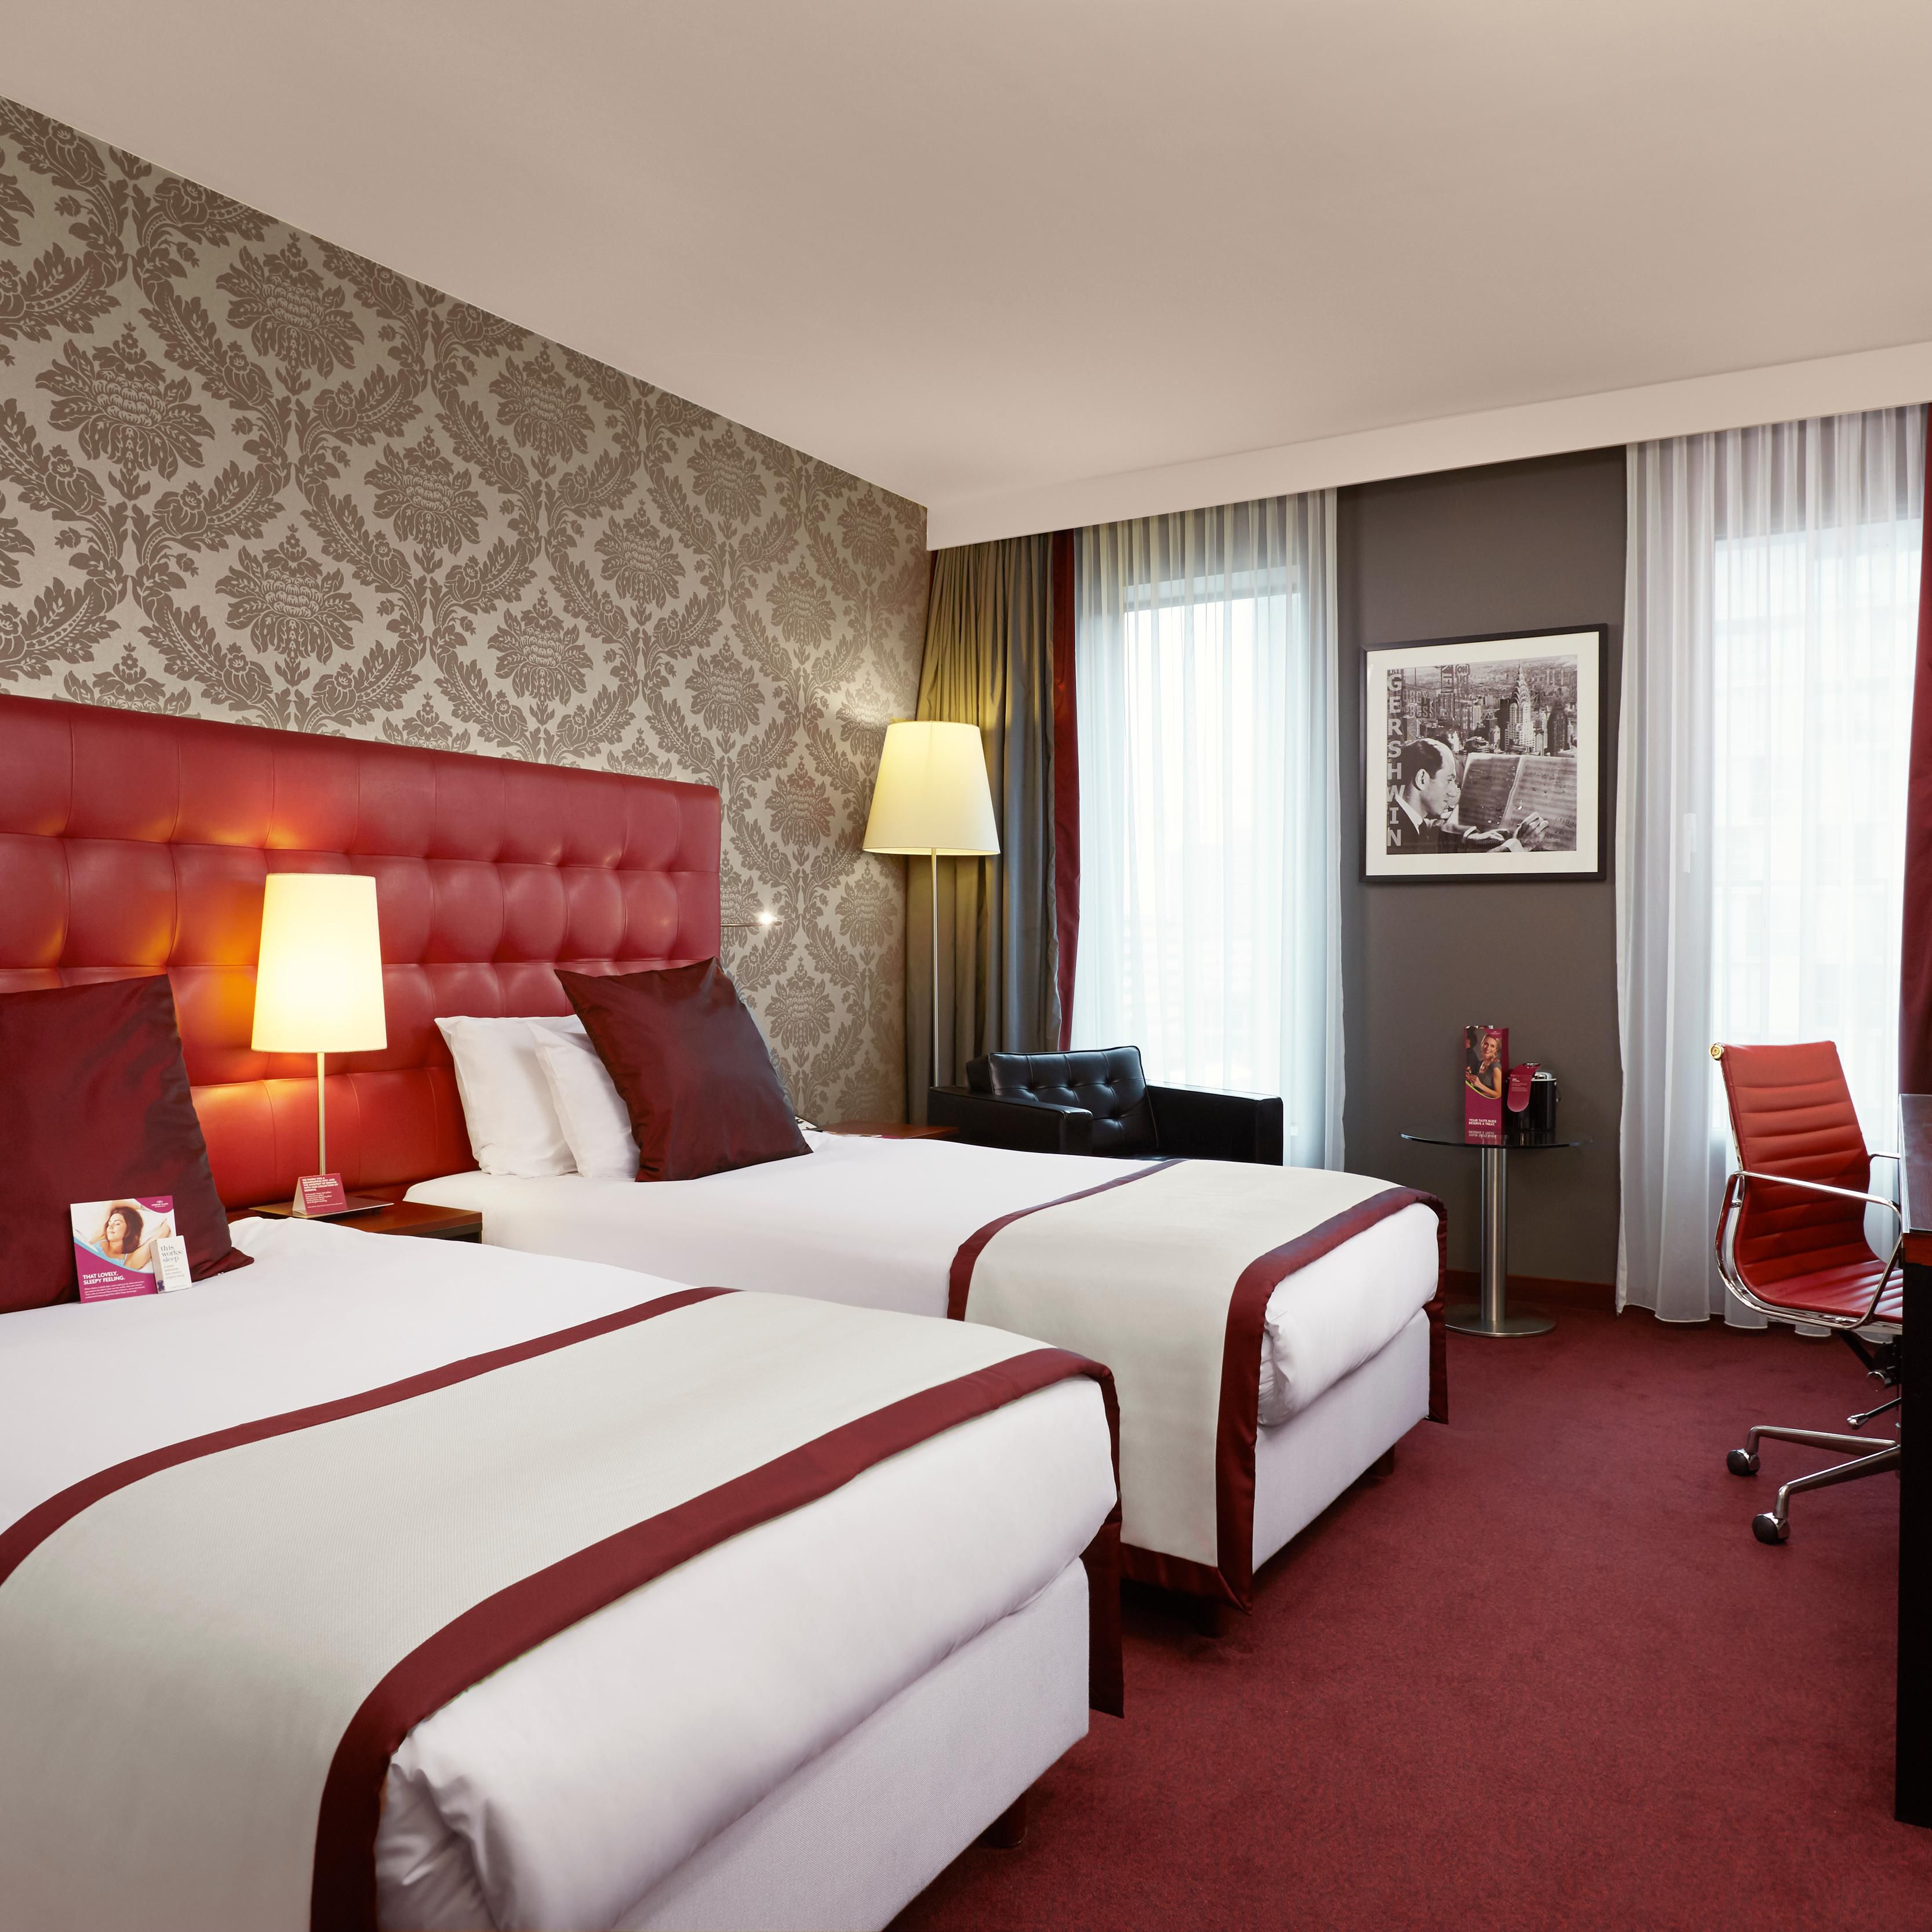 Twin Superior room at the Crowne Plaza hotel Amsterdam South